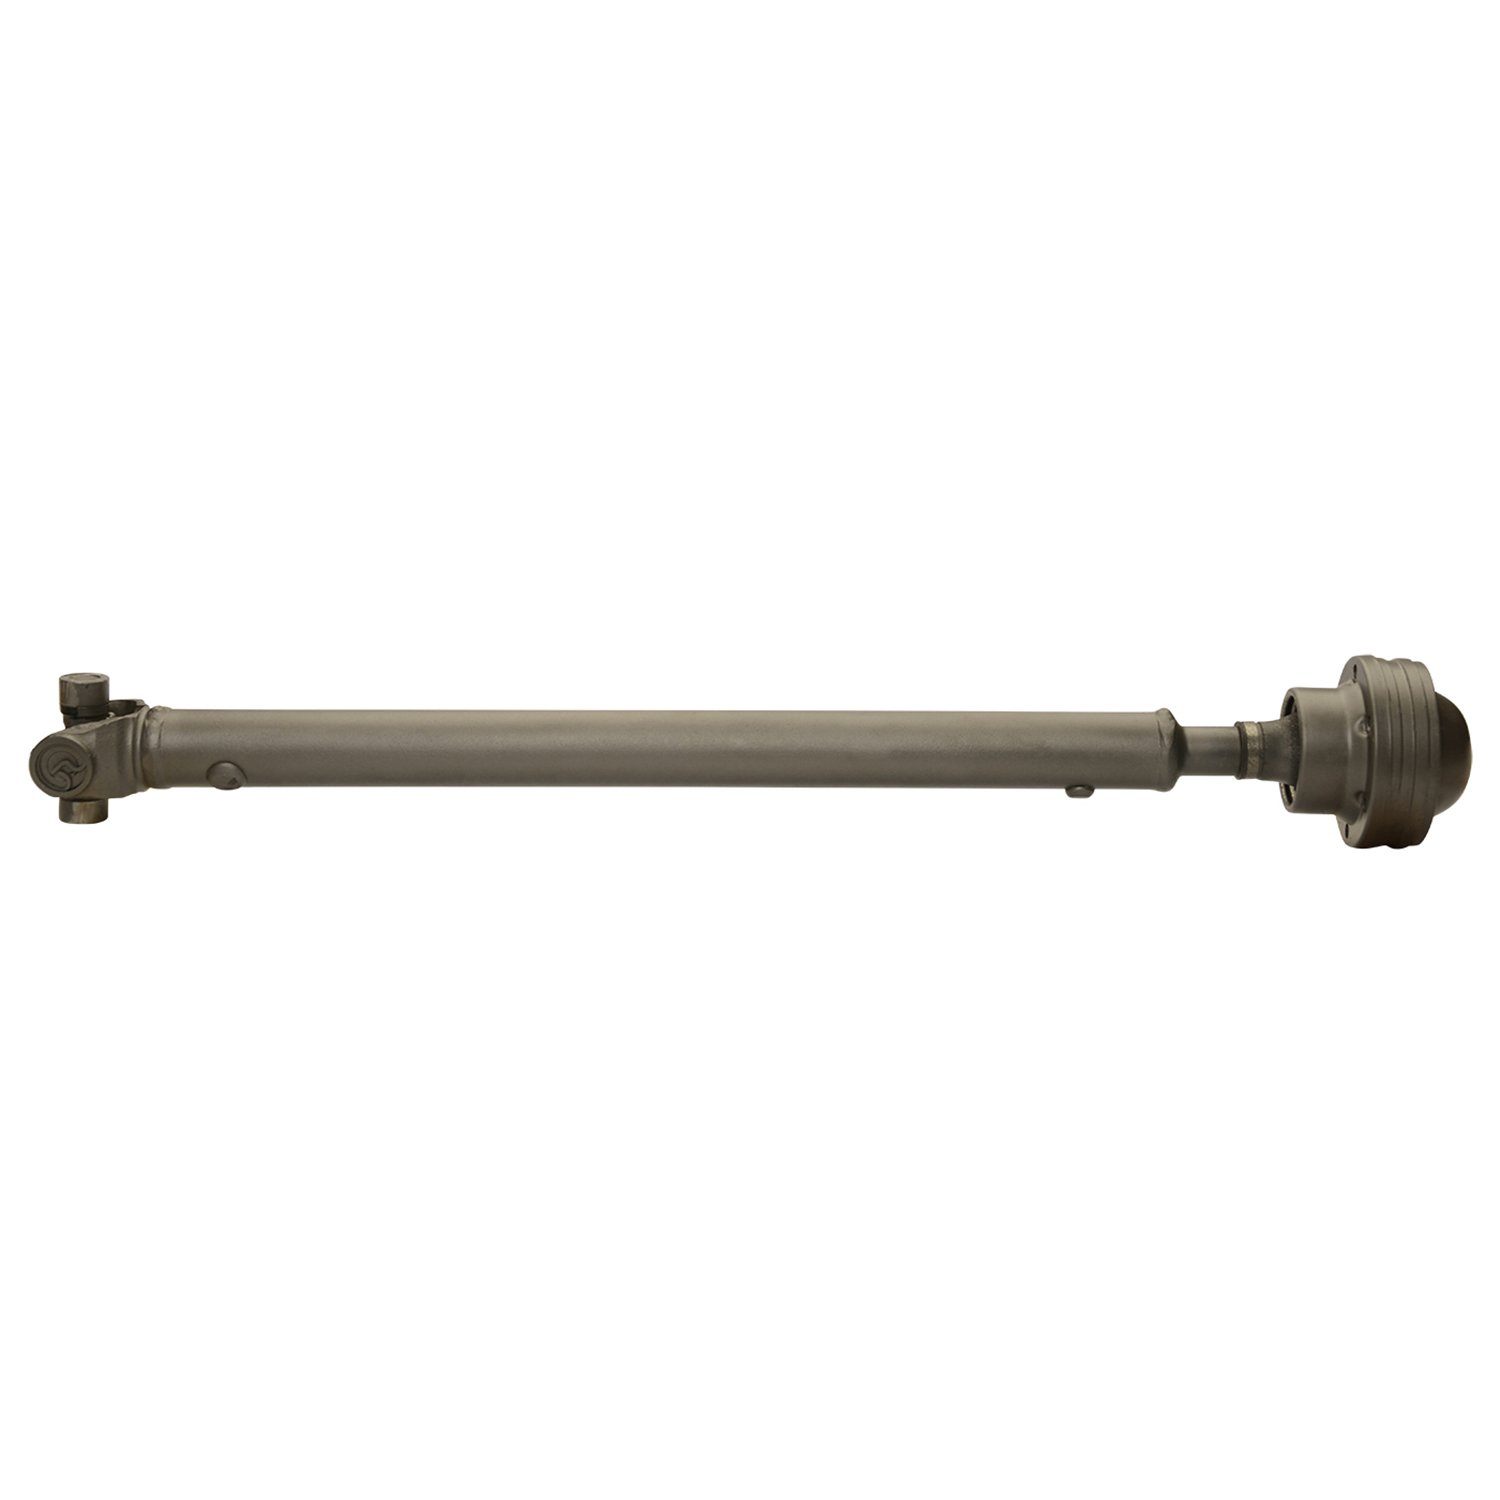 USA Standard ZDS9463 Rear Driveshaft, For Escape And Tribute, 22-1/4 in. Weld-To-Weld